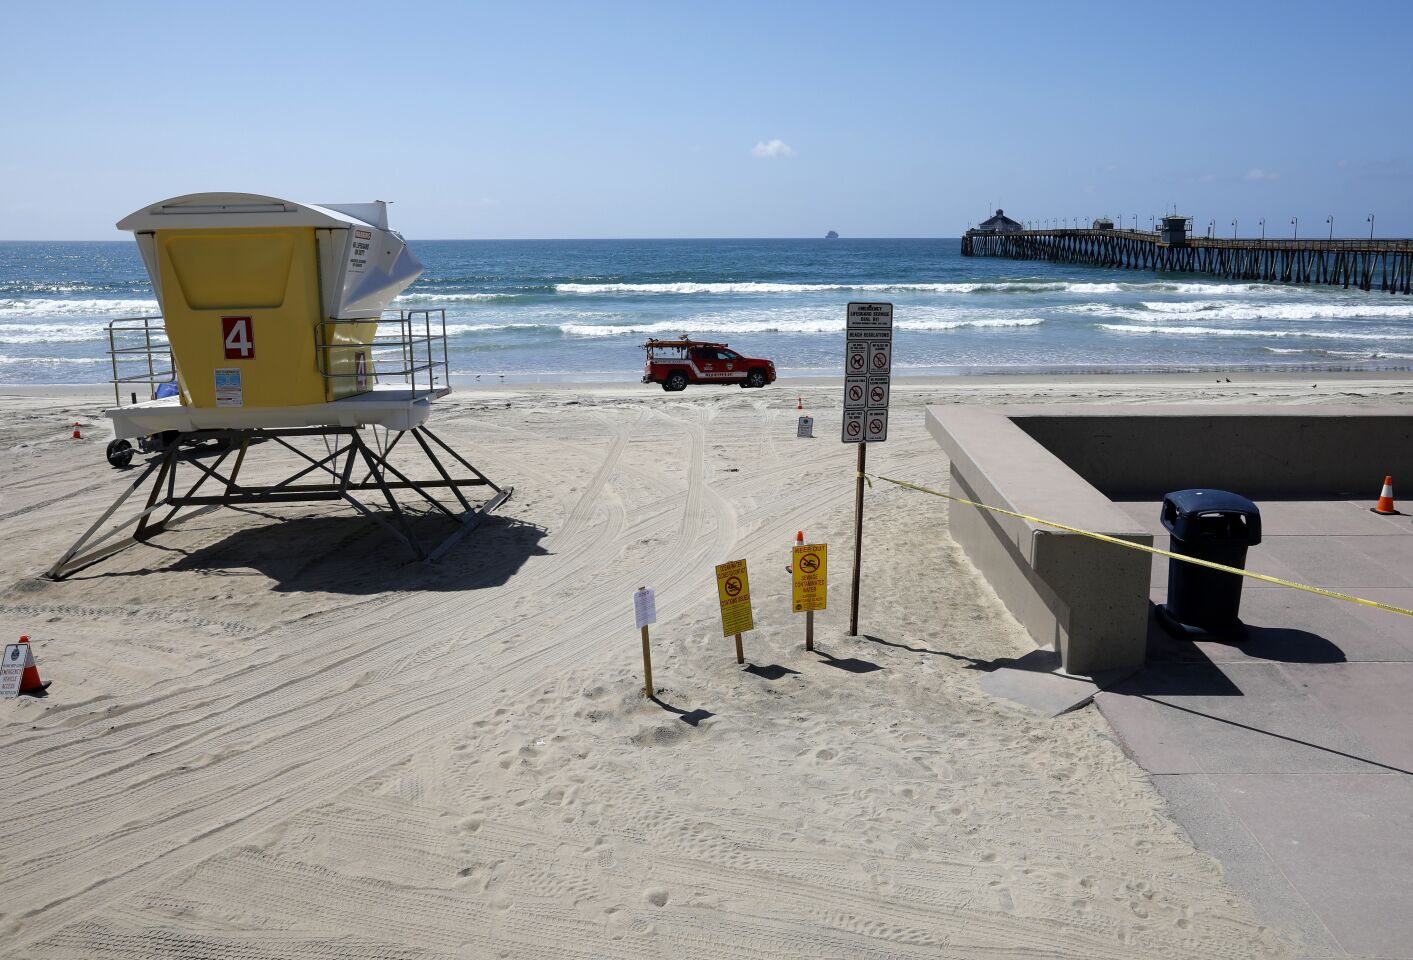 An Imperial Beach lifeguard patrols the beach, which along with the pier was closed to the public due to the coronavirus on March 29, 2020.